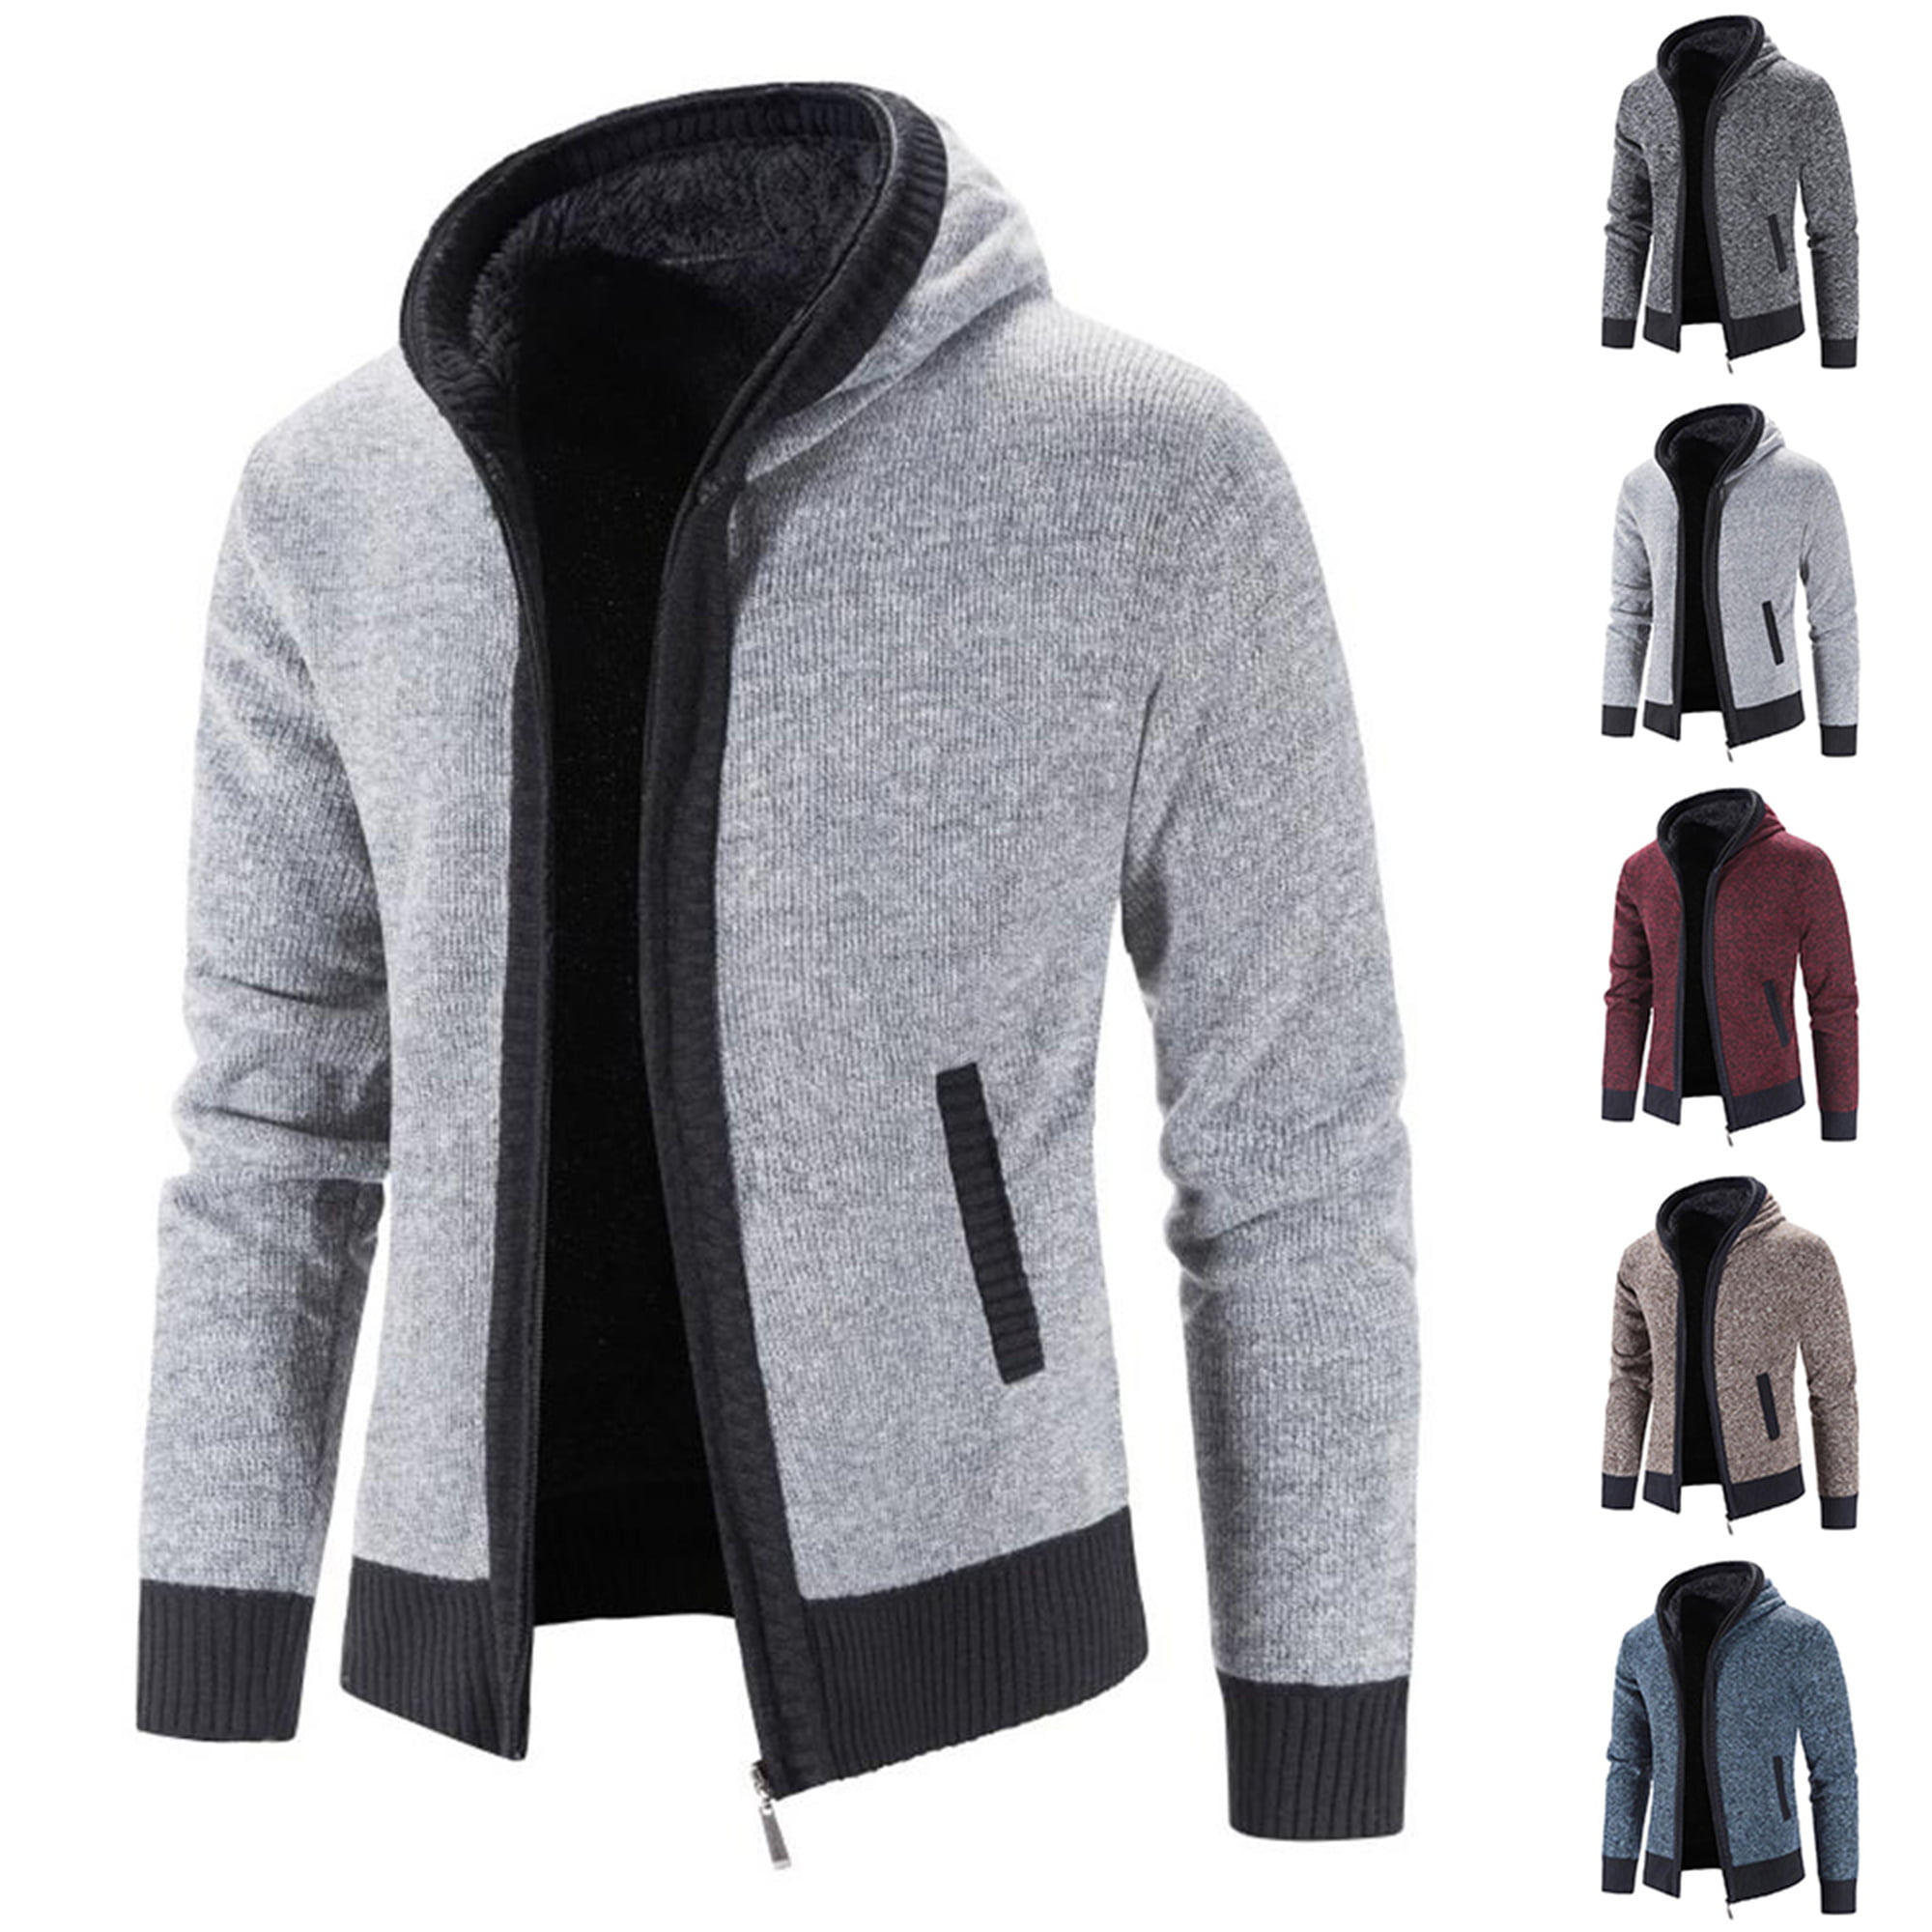 Winter All-Match Casual Men's Jacket Plus Fluff Liner Hooded Cardigan Sweater 